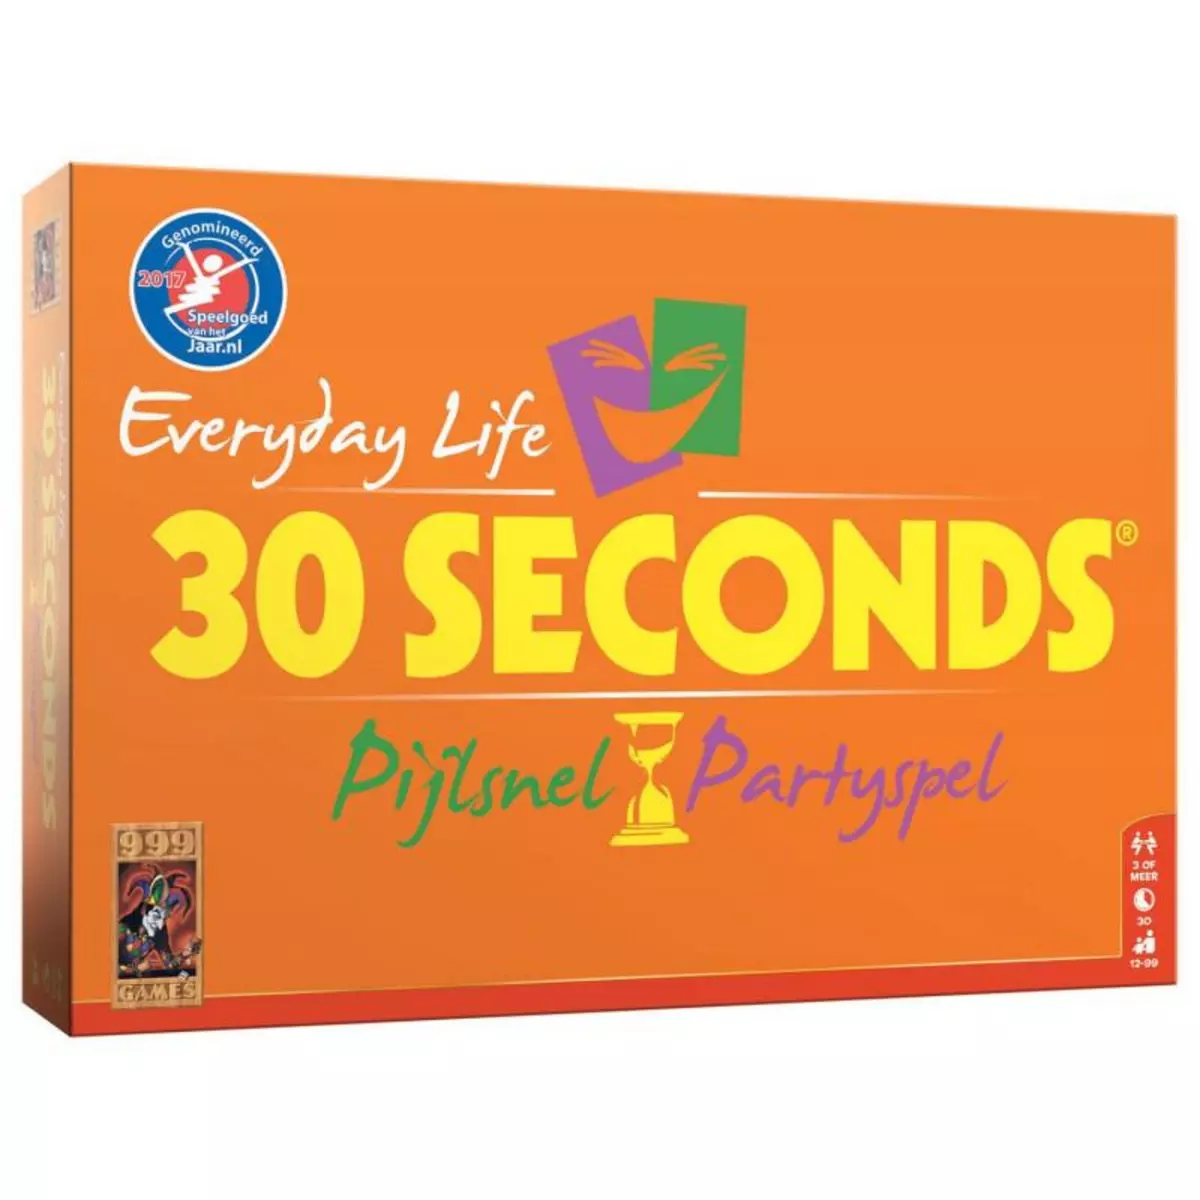 999 GAMES 999GAMES 30 Seconds Everyday Life